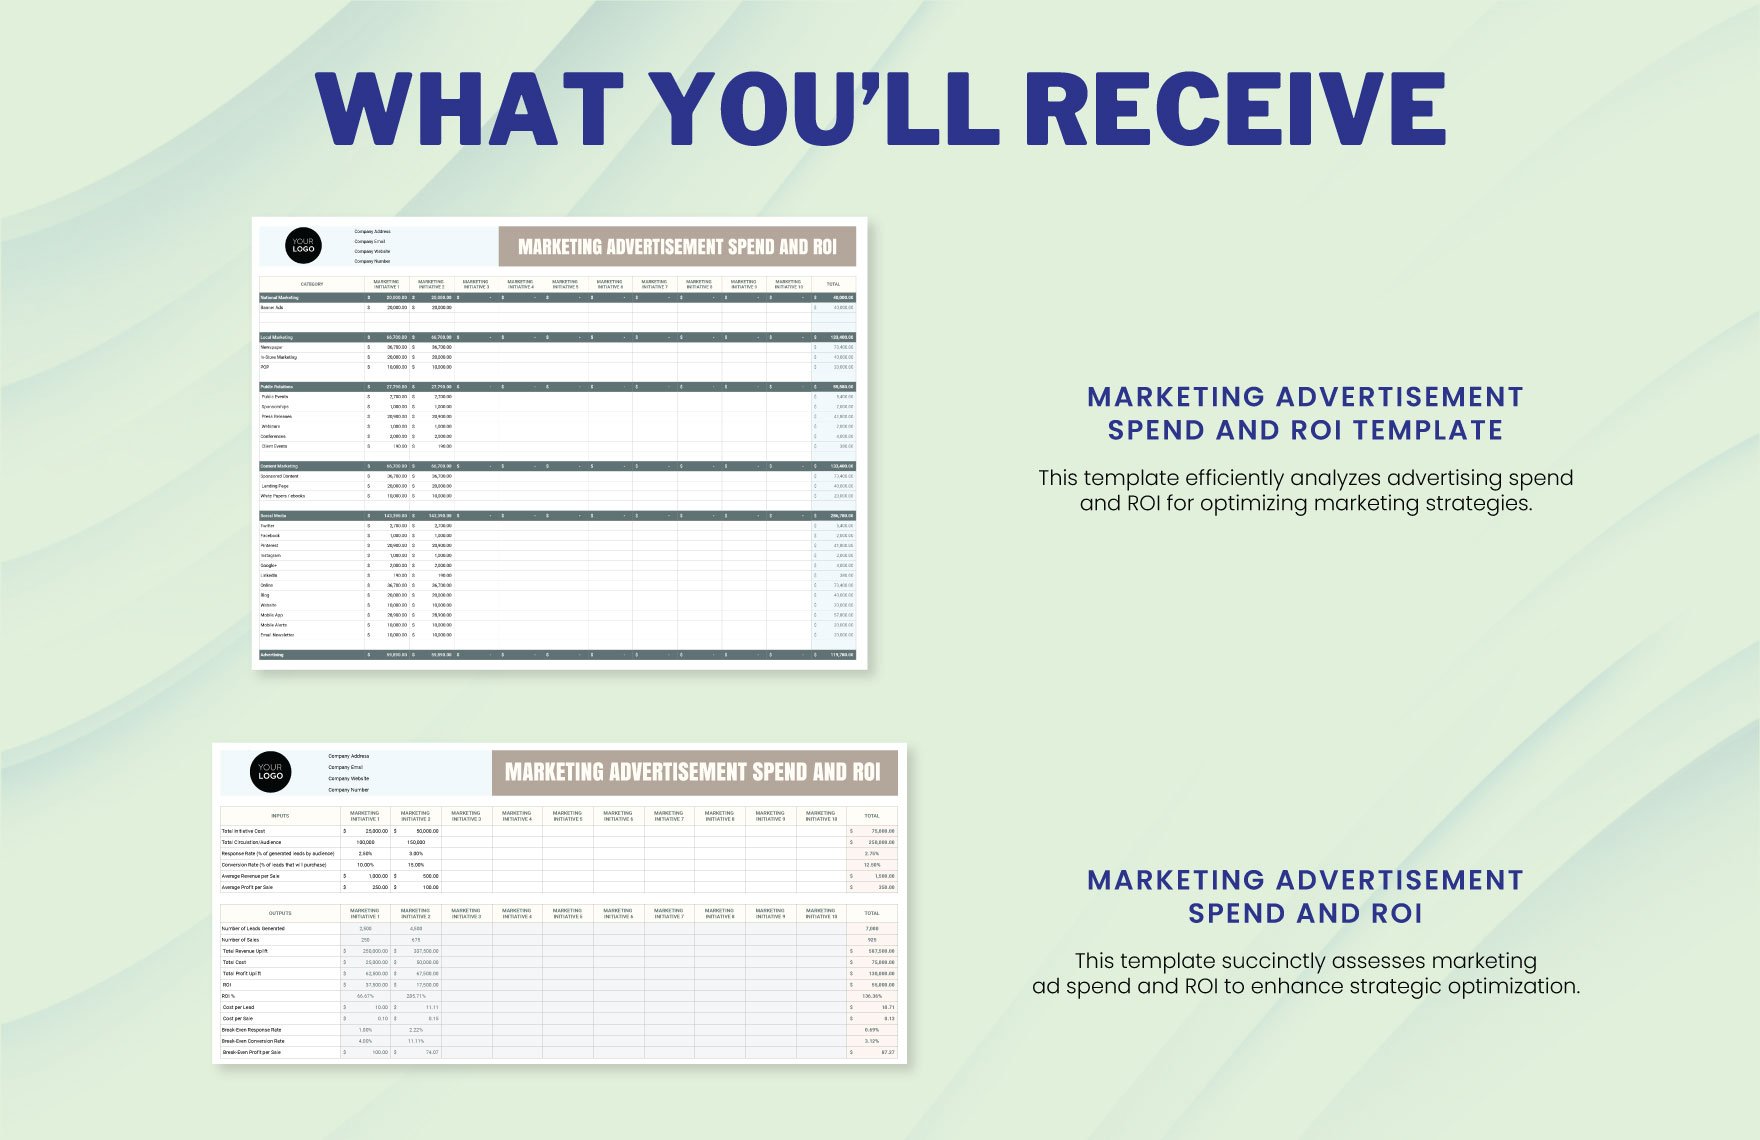 Marketing Advertisement Spend and ROI Template